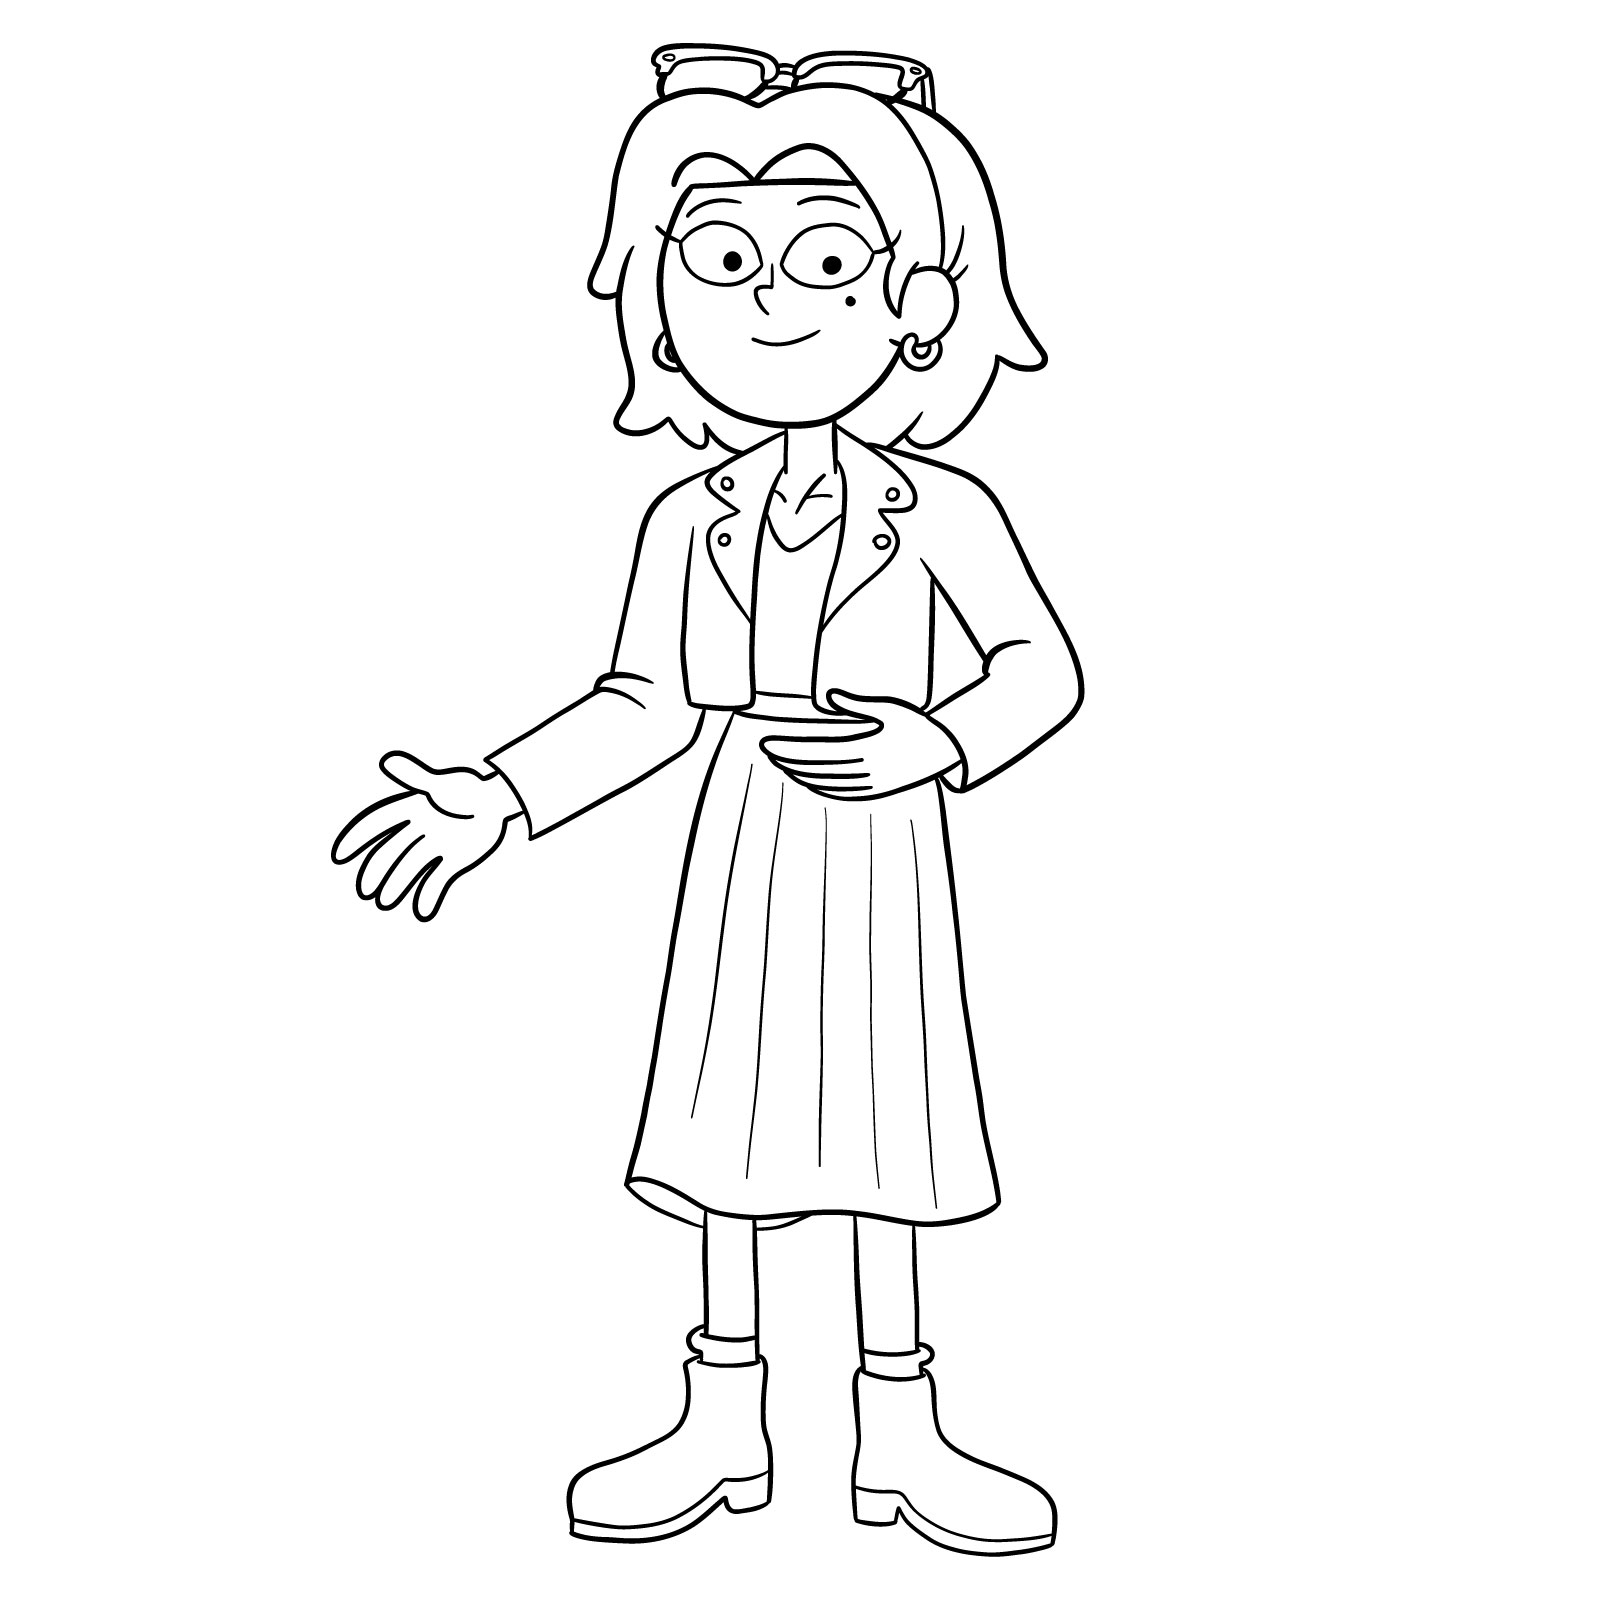 How to draw Sasha Waybright from the epilogue episode - final step